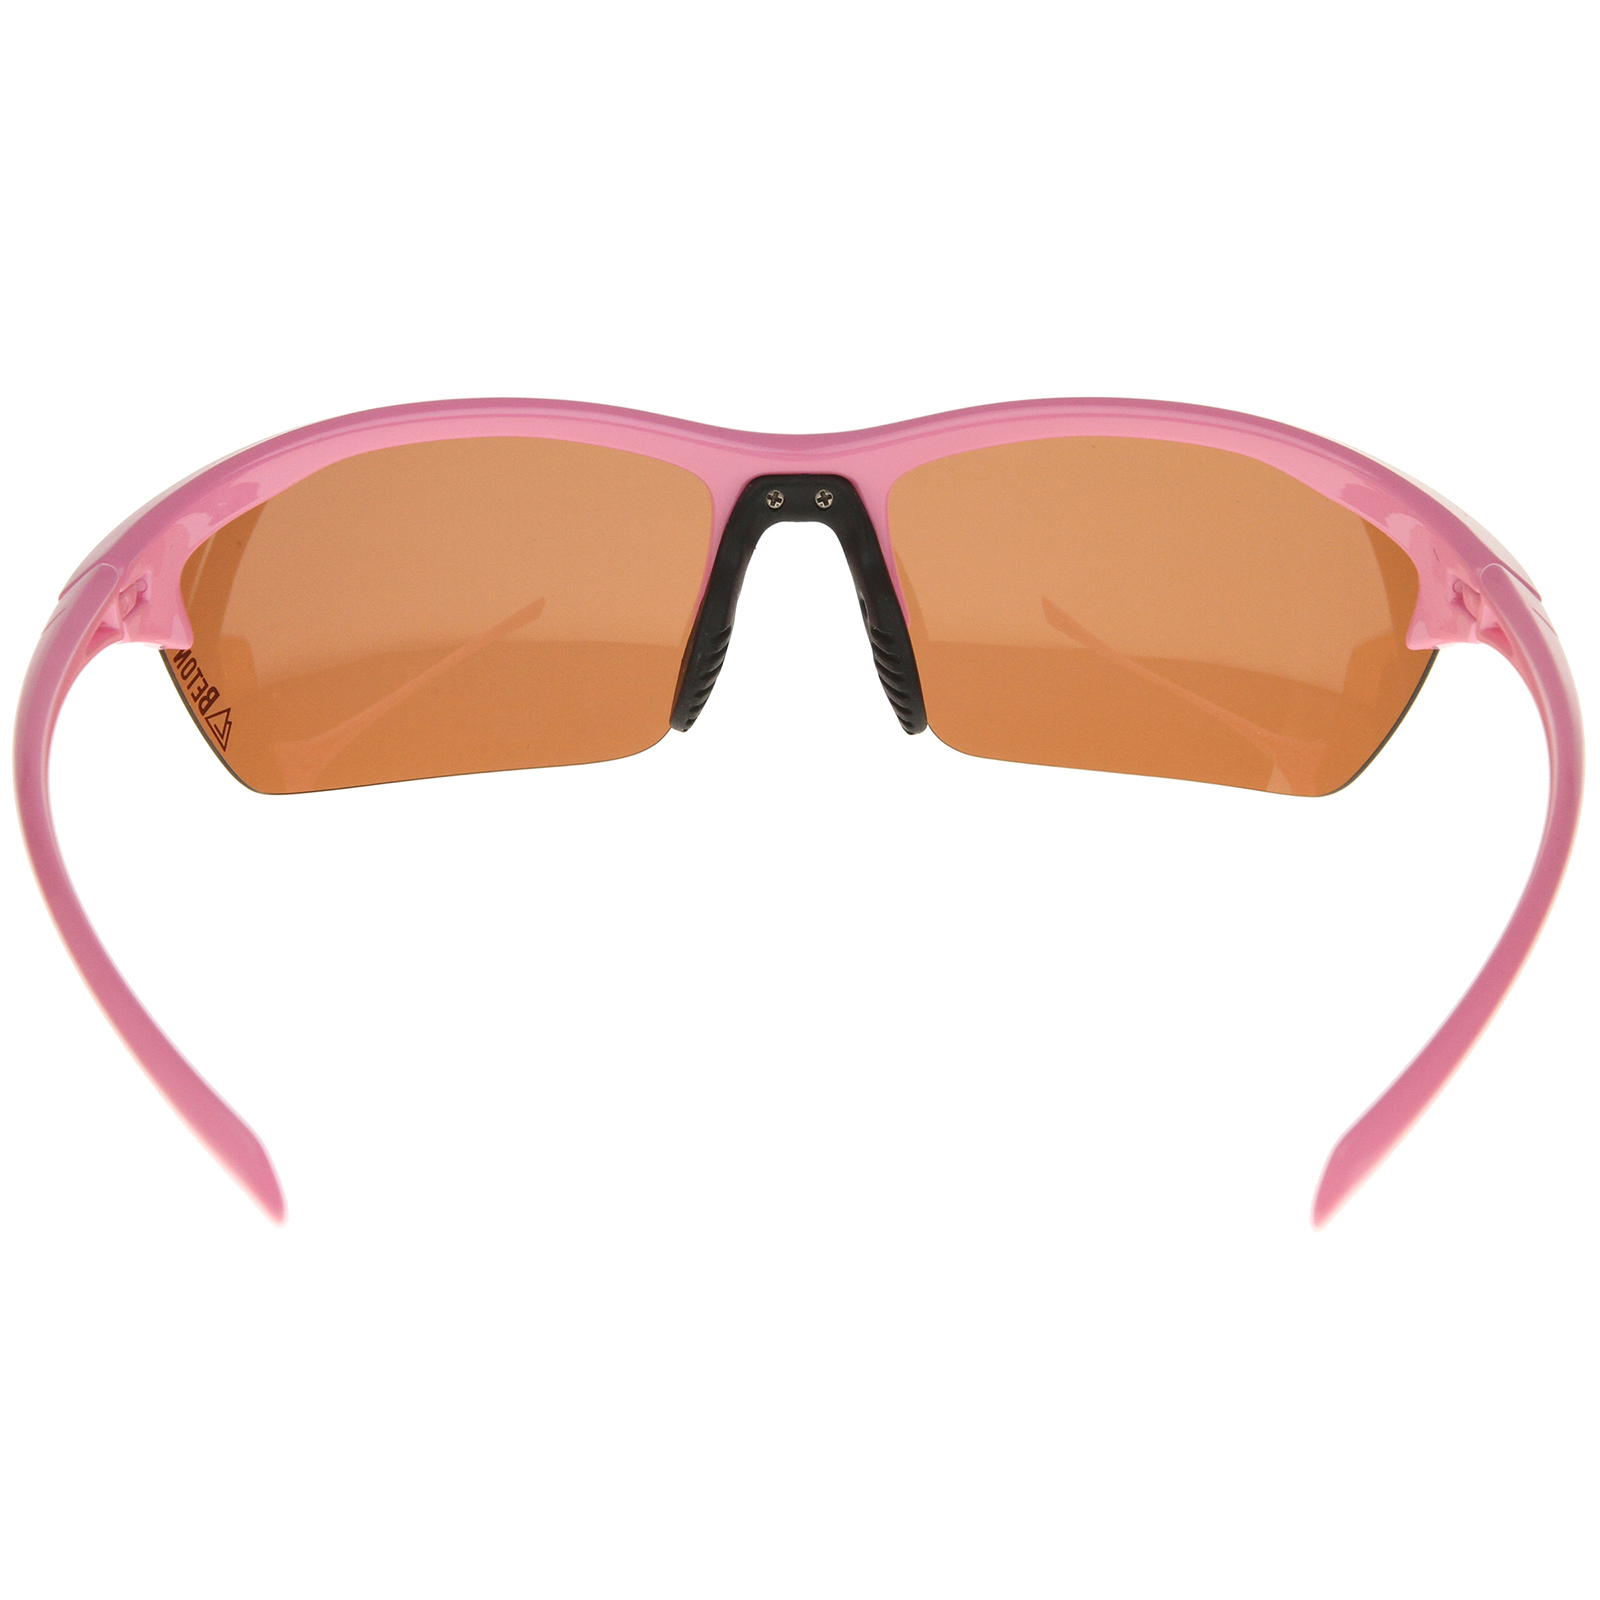 Beton Male Wakely - Polarized Shatterproof Lens Half-Frame TR-90 Sports Wrap Sunglasses (Shiny Pink / Brown) - 68mm - image 3 of 6